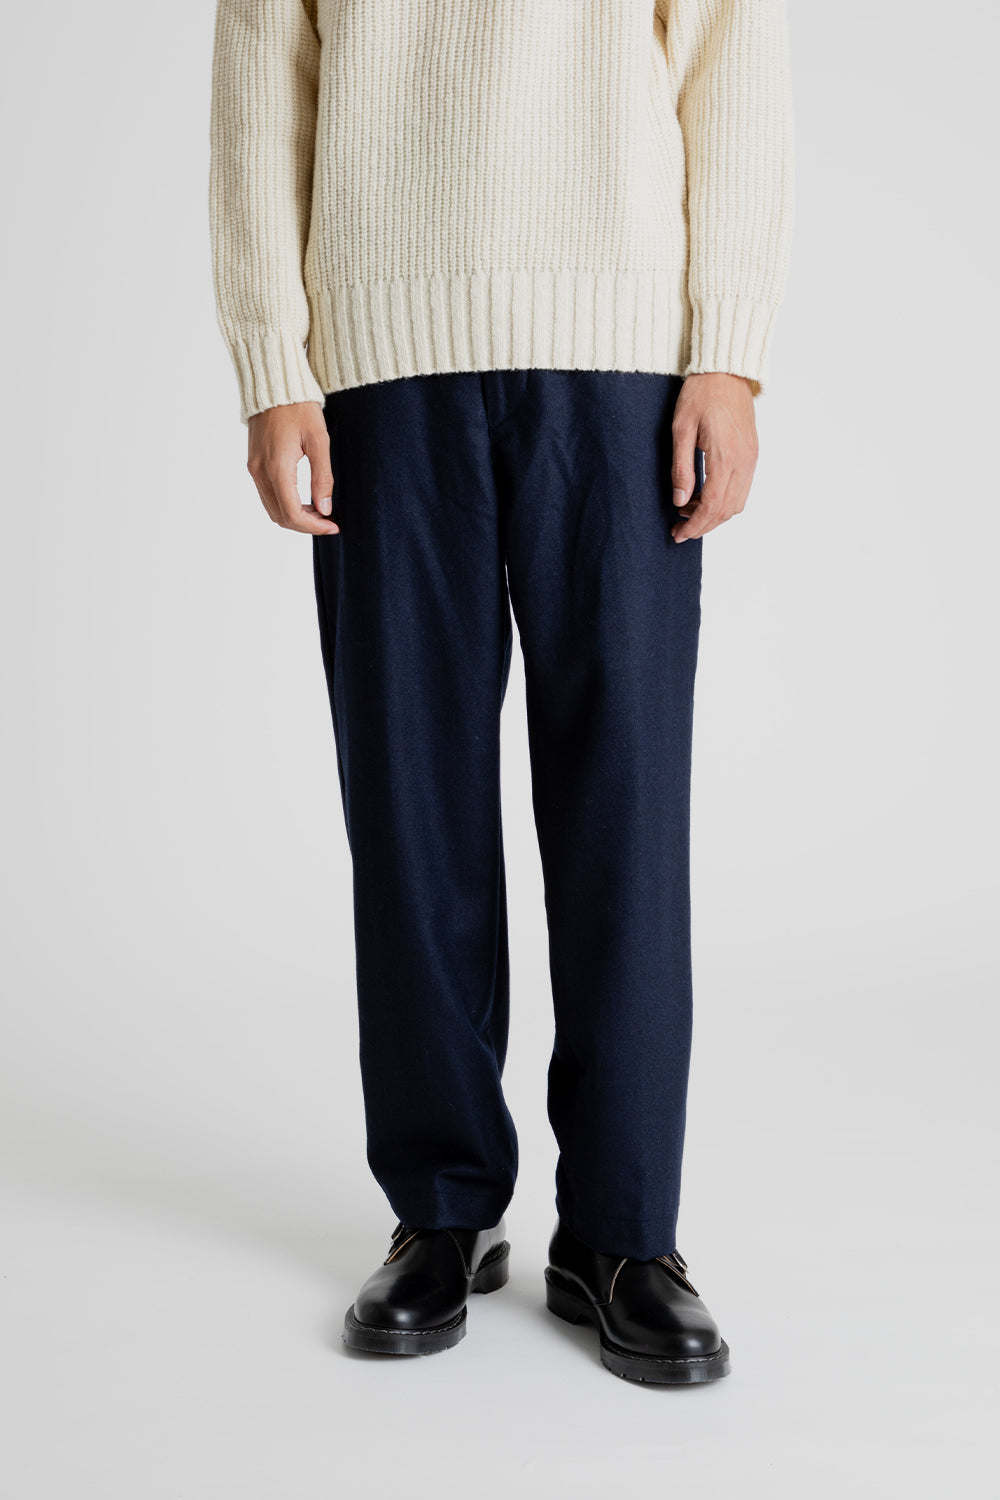 Parages Tom Flannel Pants in Navy